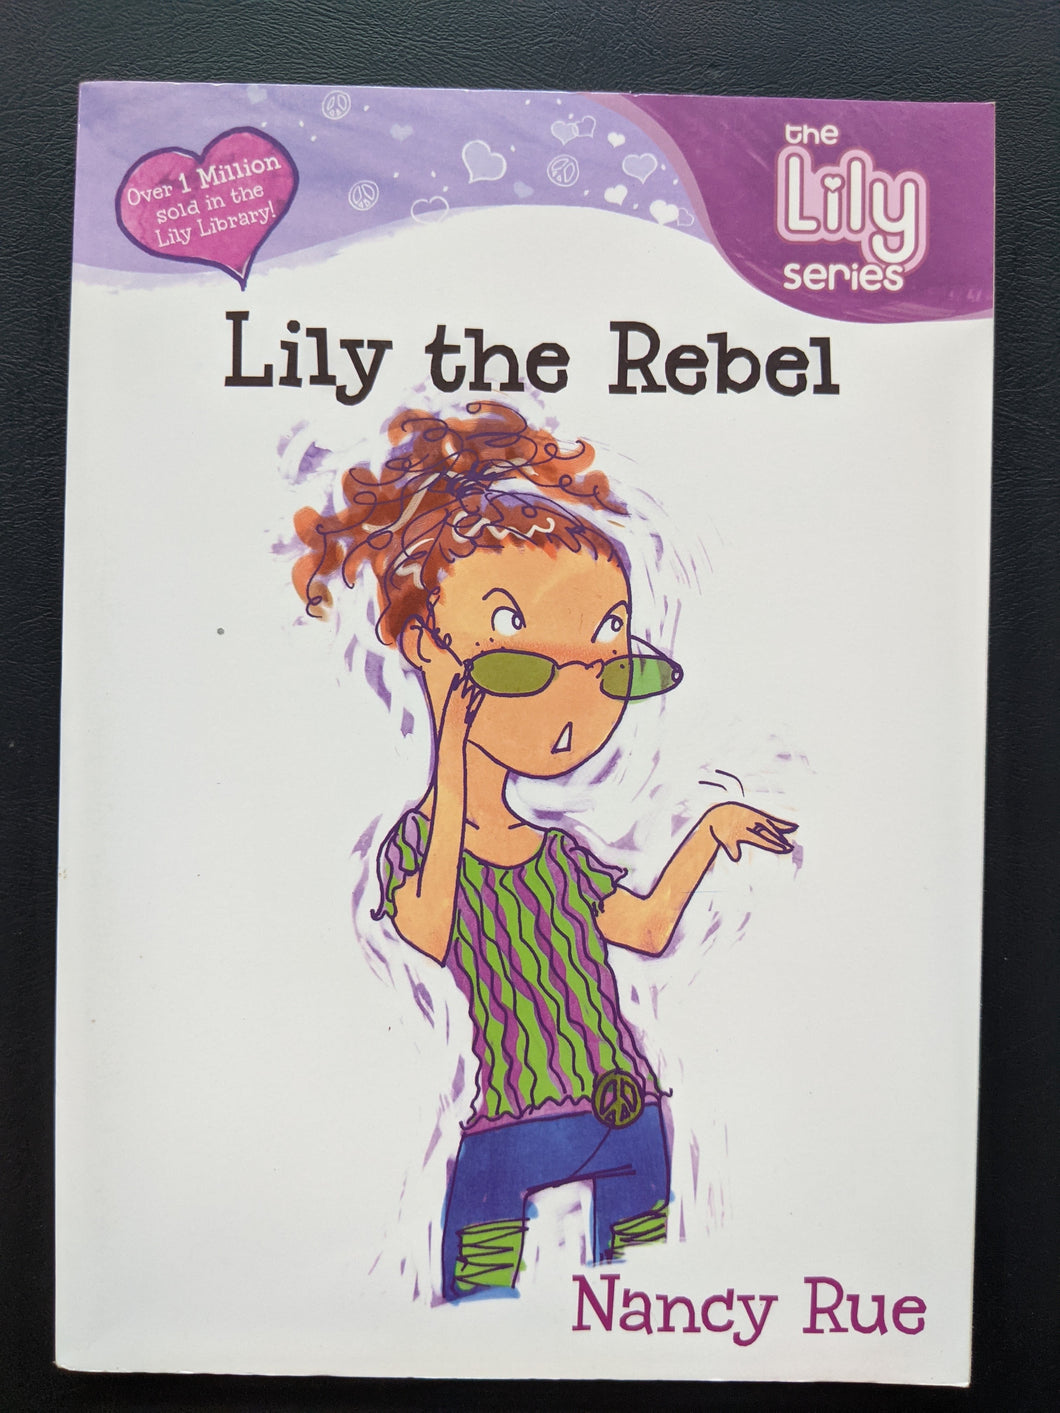 Lily the Rebel (Lily Series #6) by Nancy N. Rue